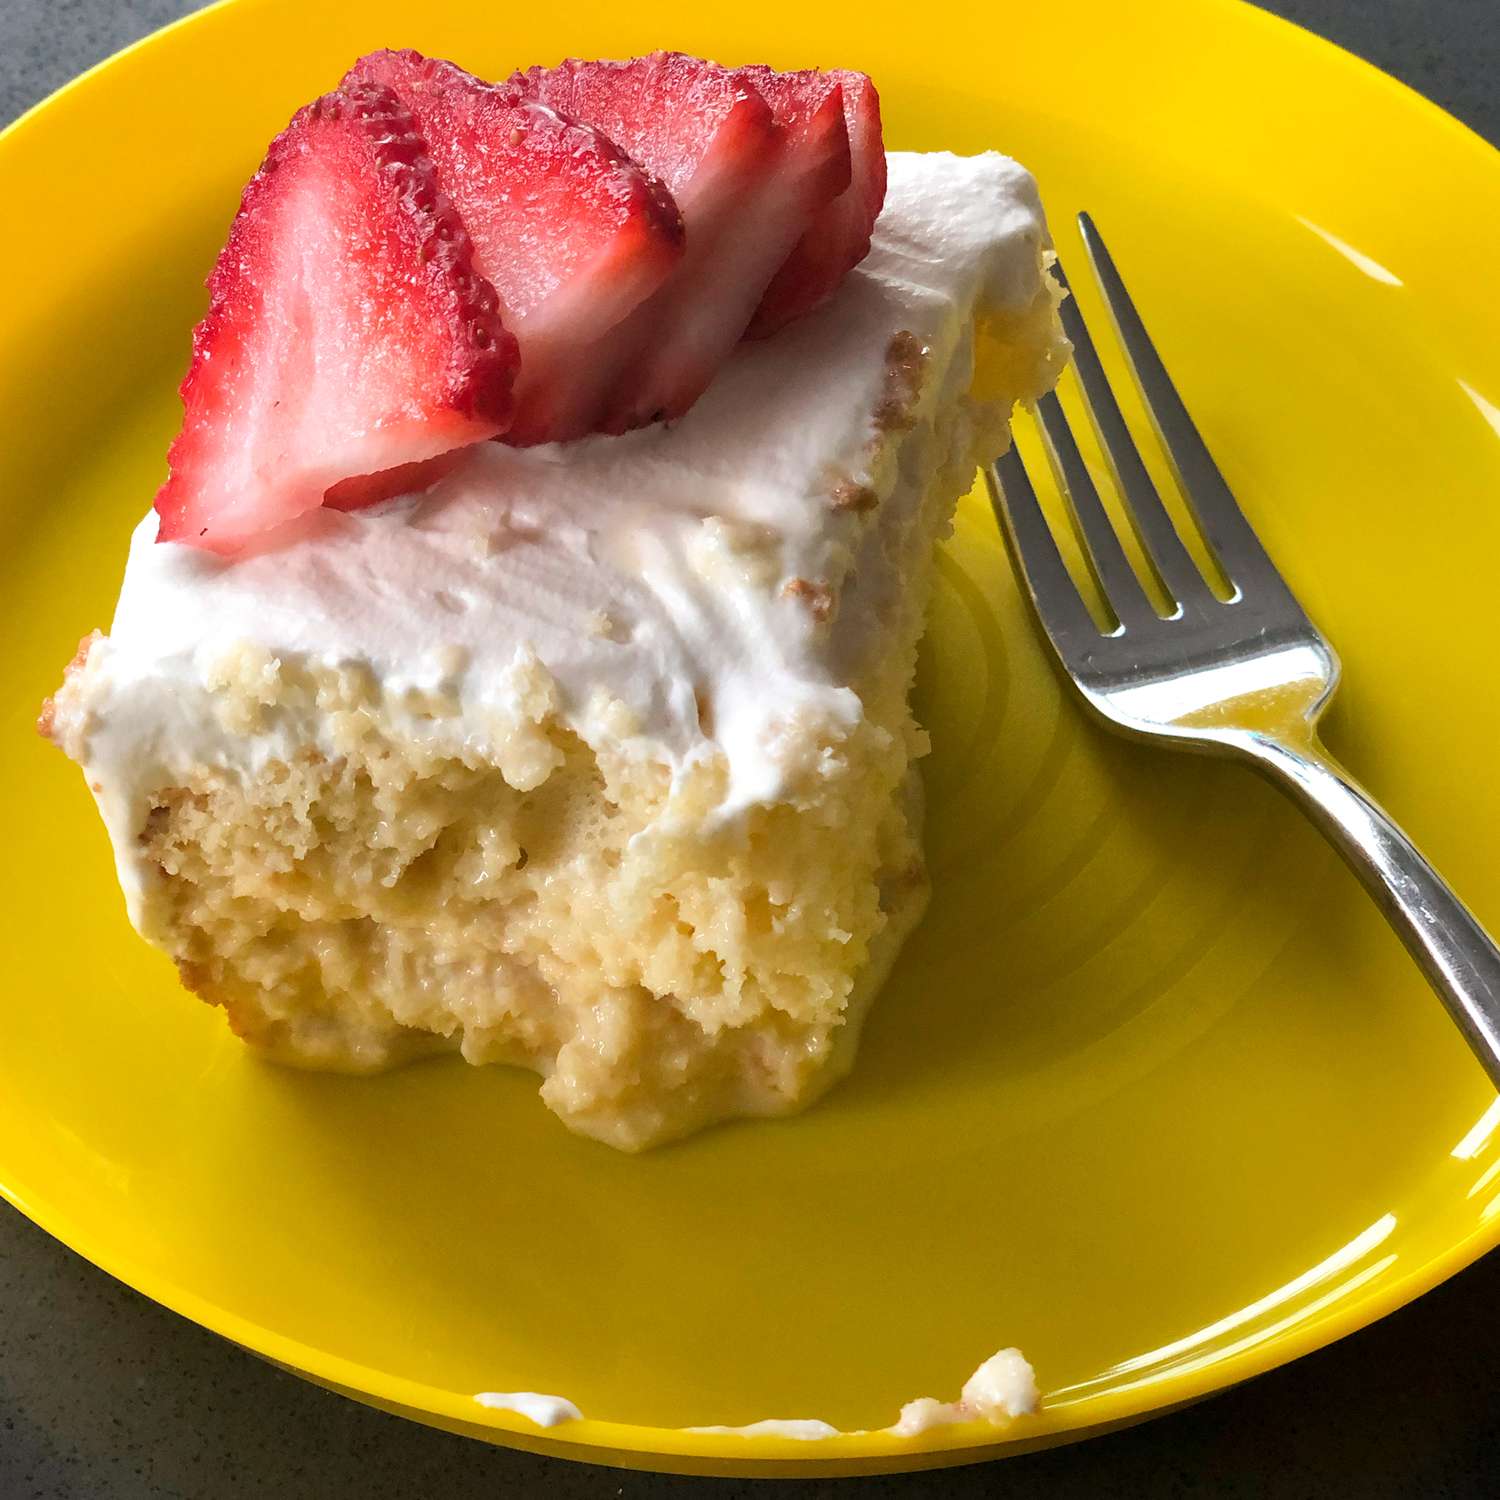 close up view of a slice of Tres Leches Cake garnished with sliced strawberries on a yellow plate with a fork